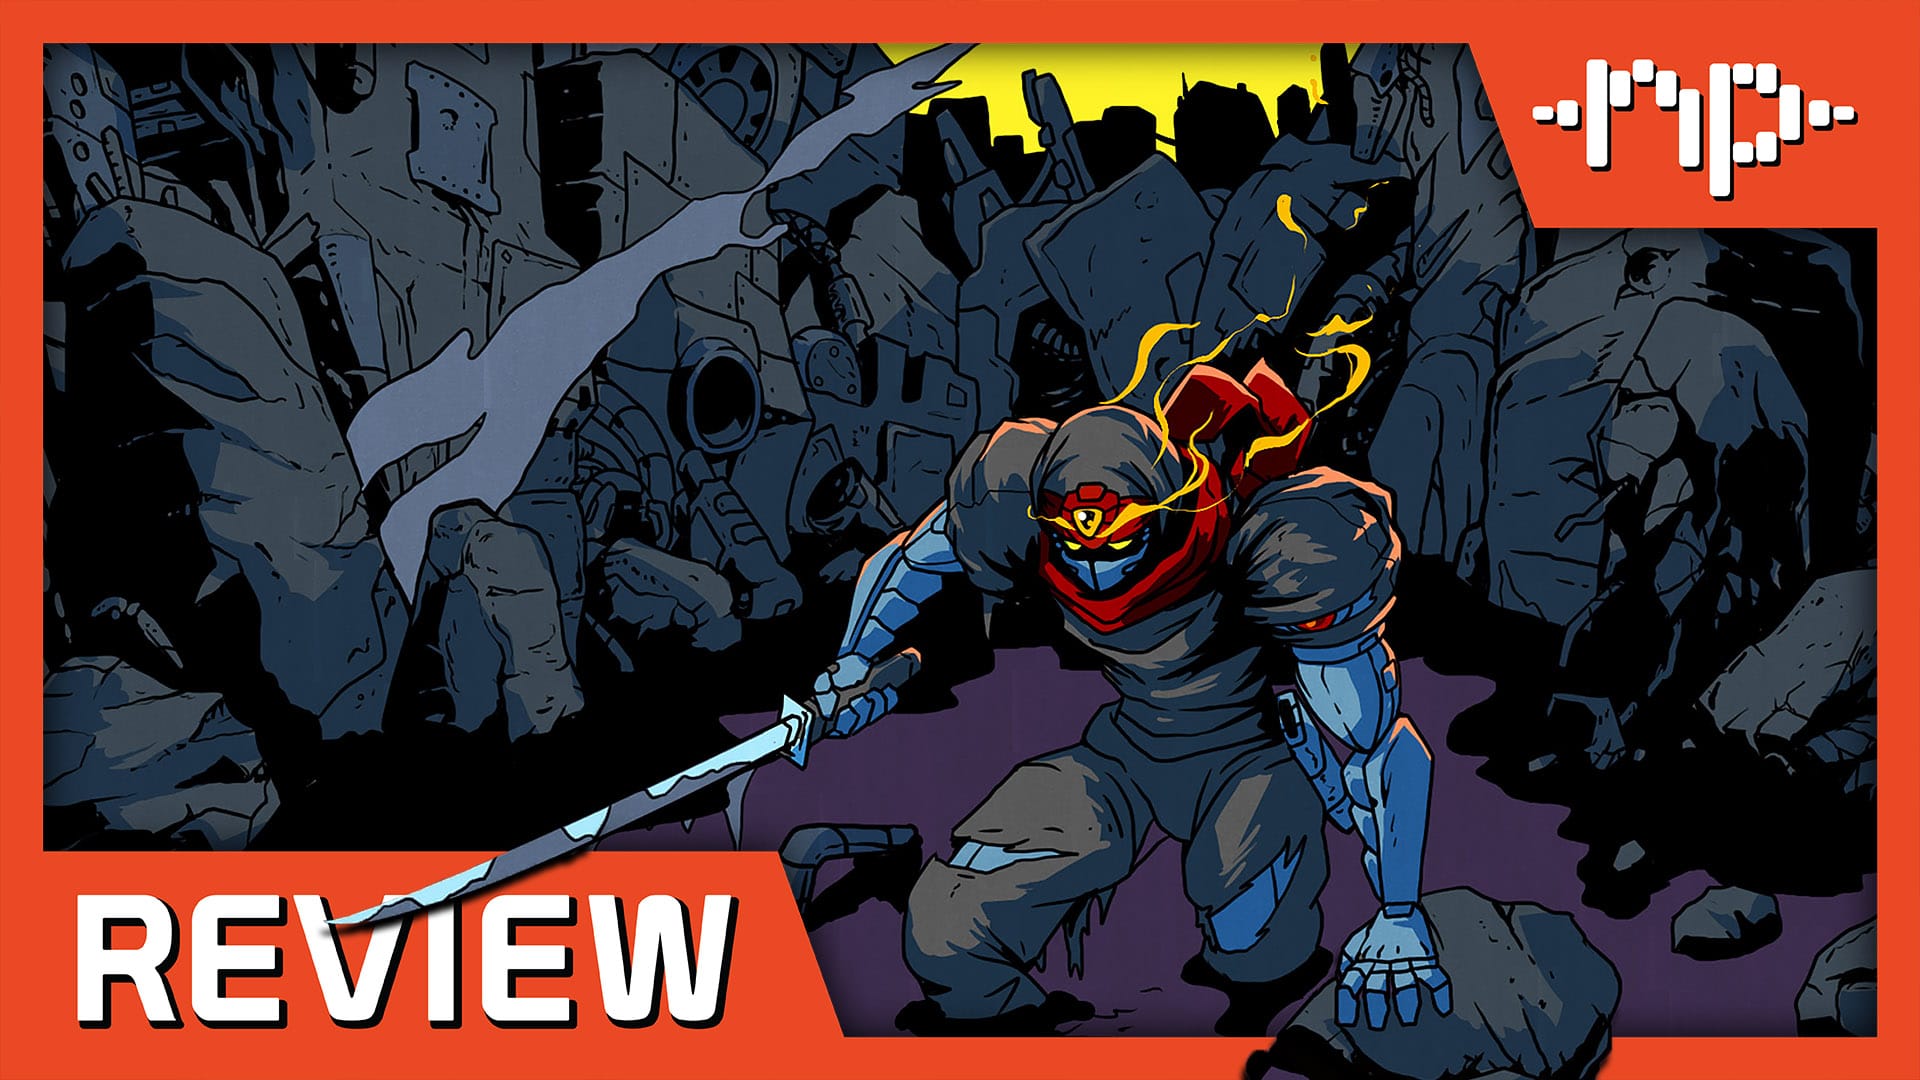 Cyber Shadow Review – The Only Game With “Cyber” in the Title That You Should be Playing